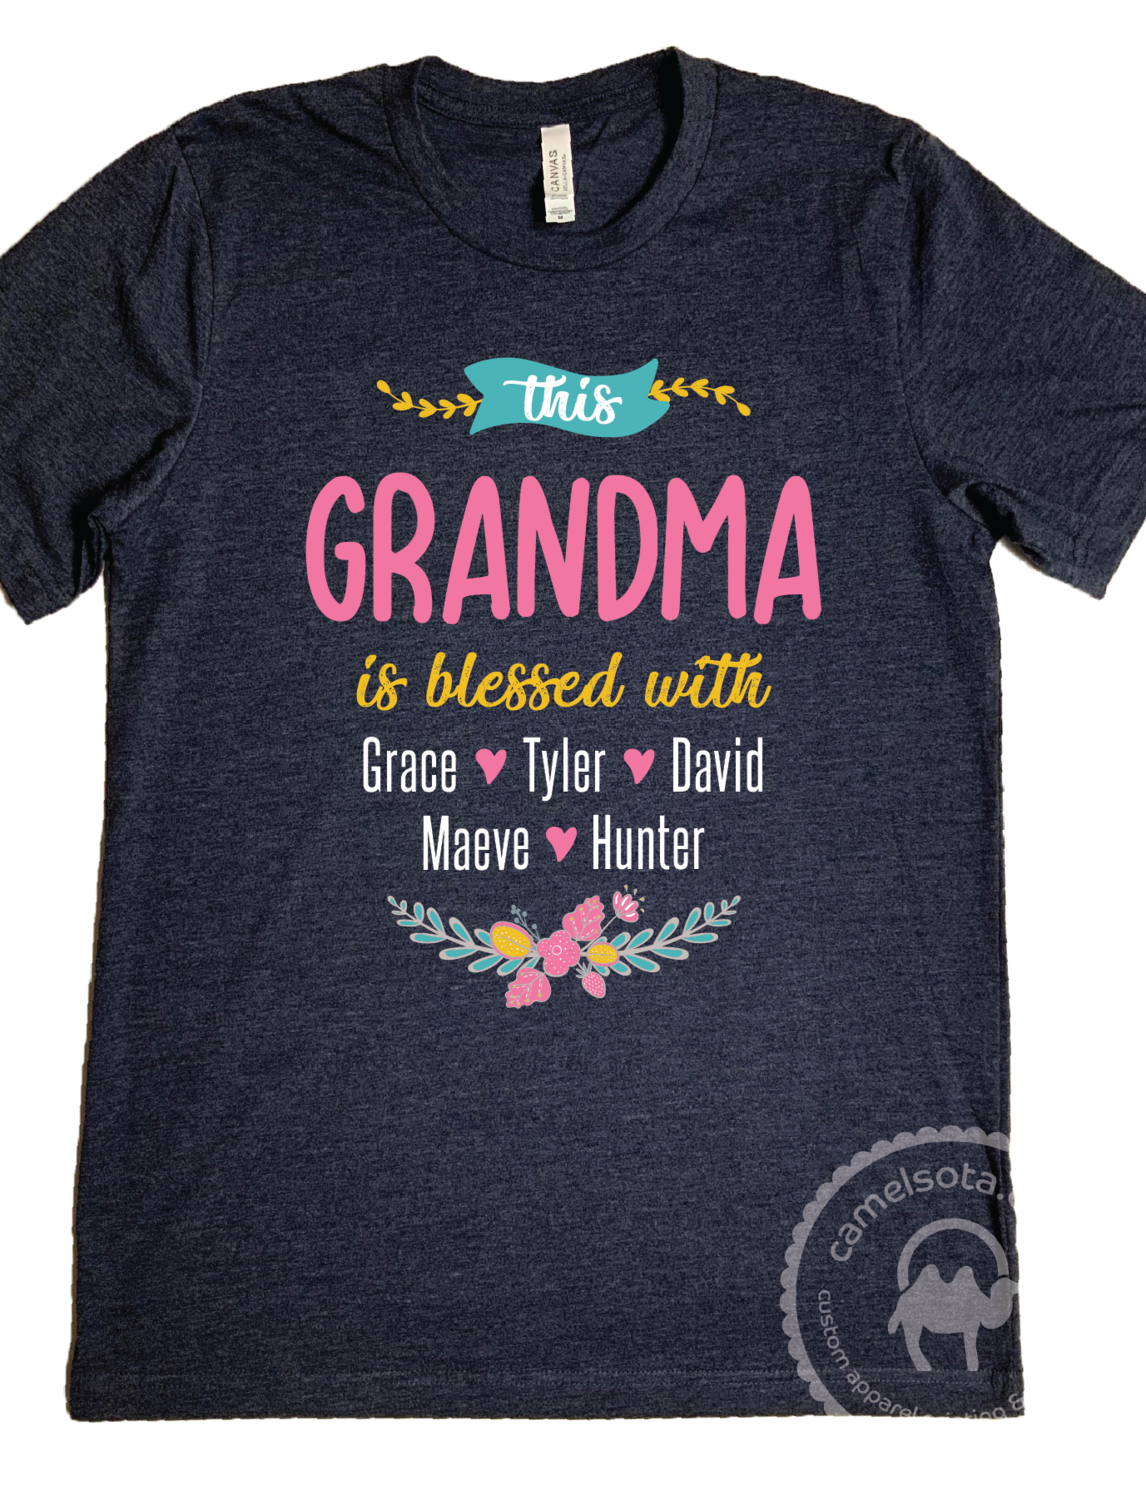 This Grandma is Blessed With Grandkids Shirt